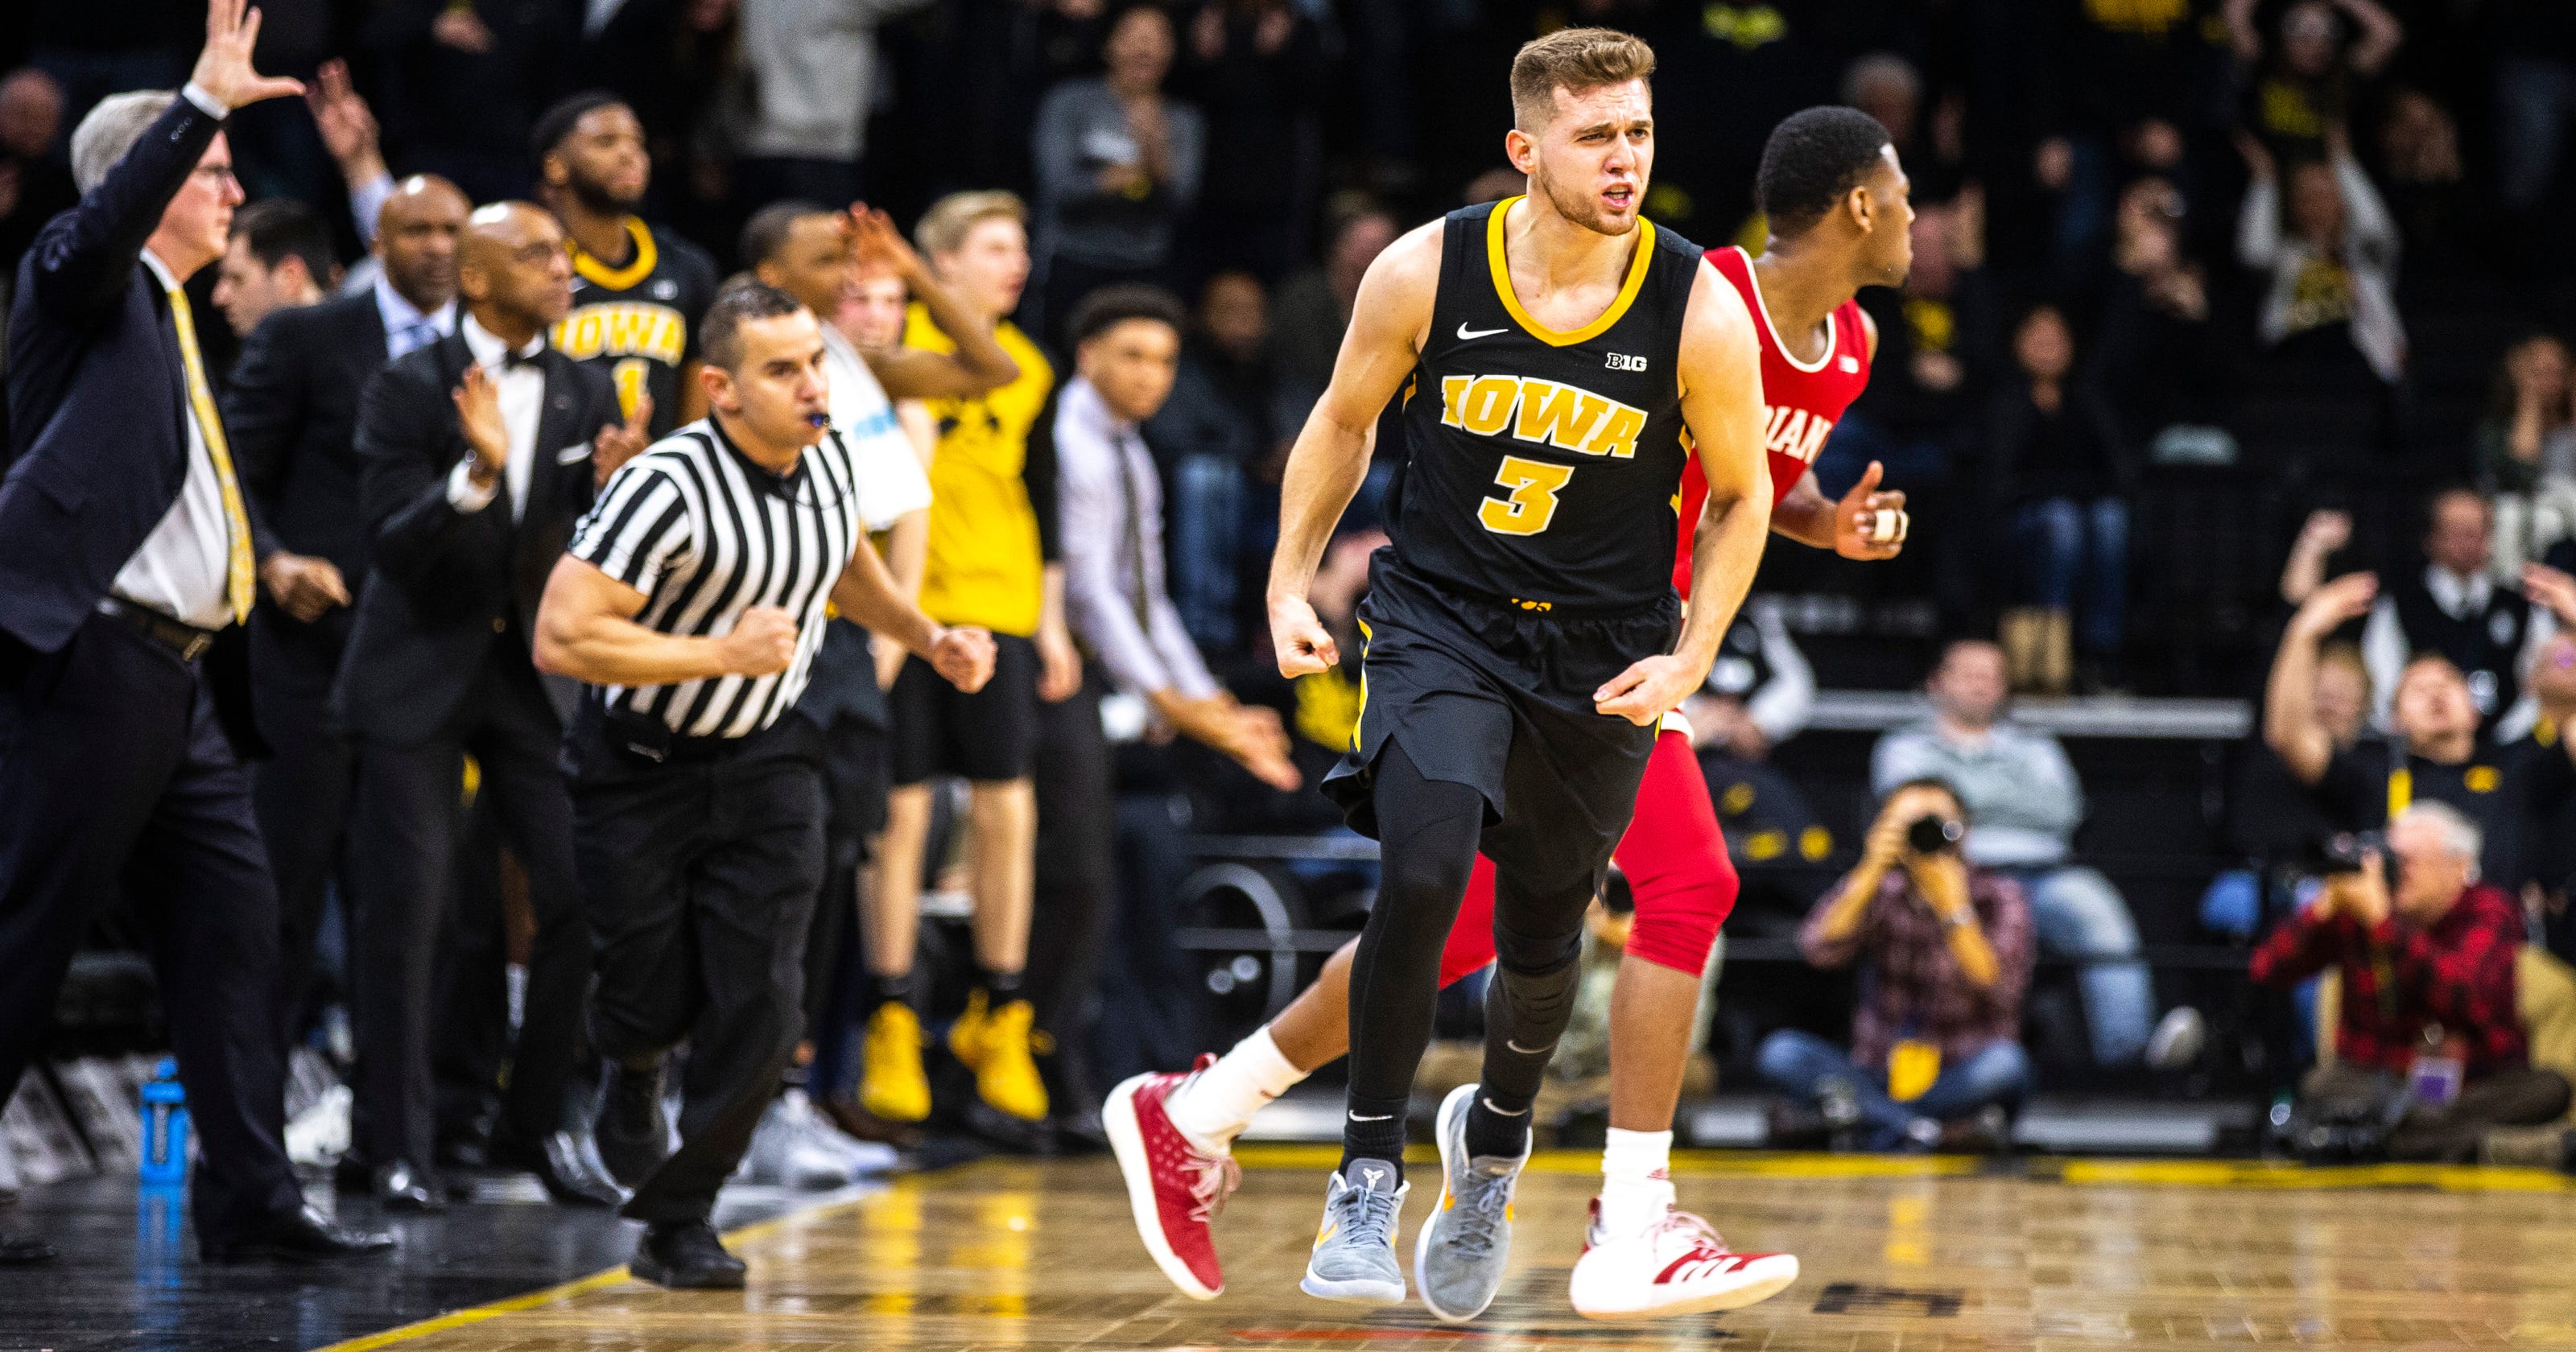 Iowa basketball The Hawkeyes win in overtime against the Hoosiers.